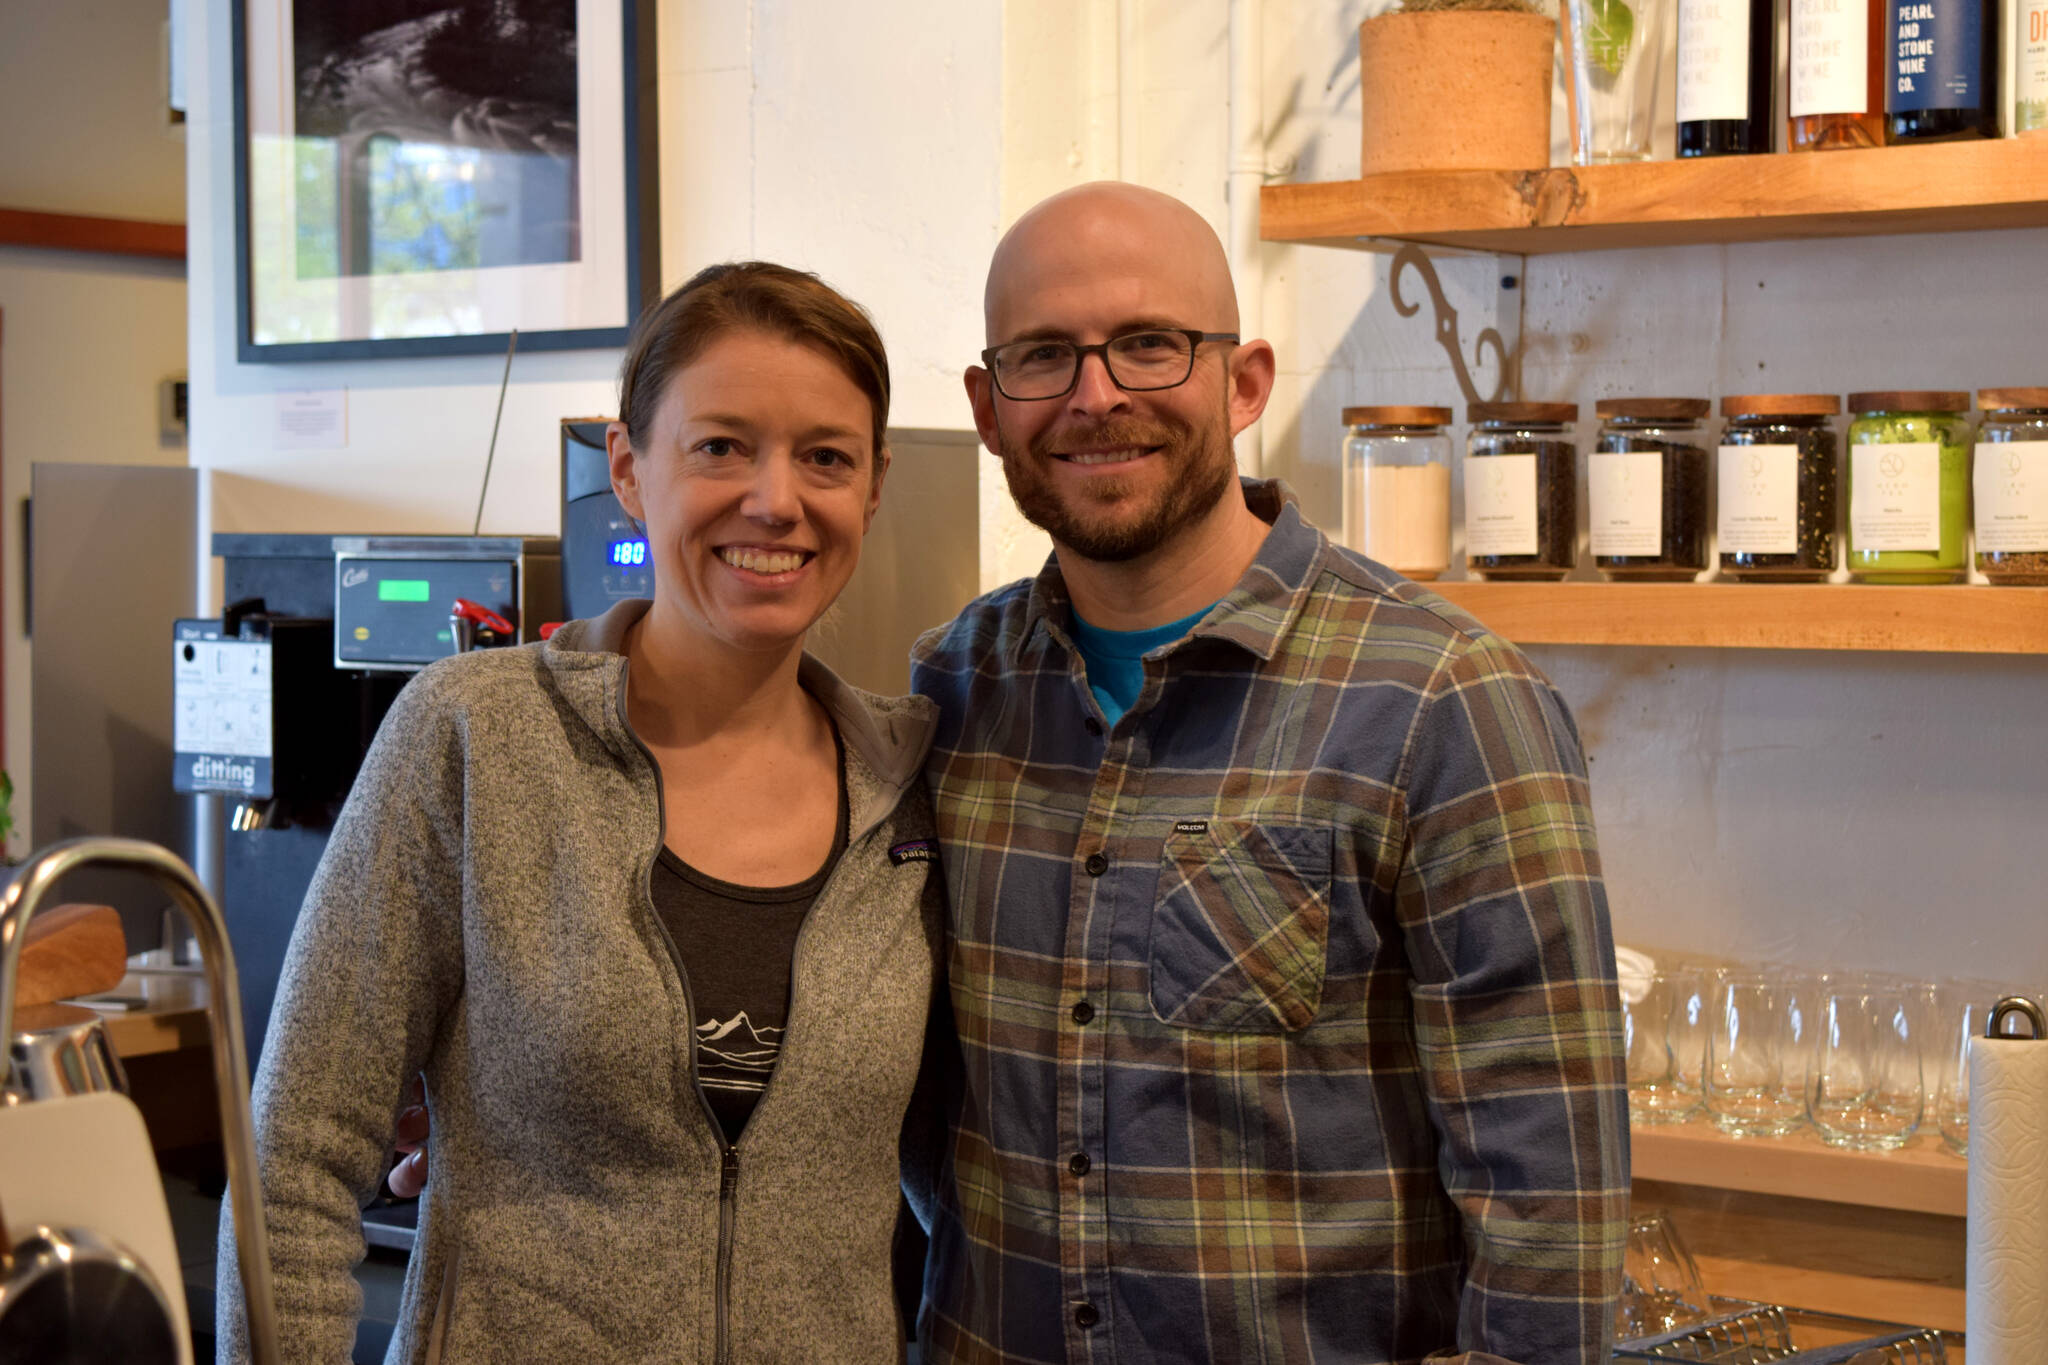 Photo by Conor Wilson/Valley Record
Meghan and David Schumacher, owners of Arête Coffee Bar in North Bend.